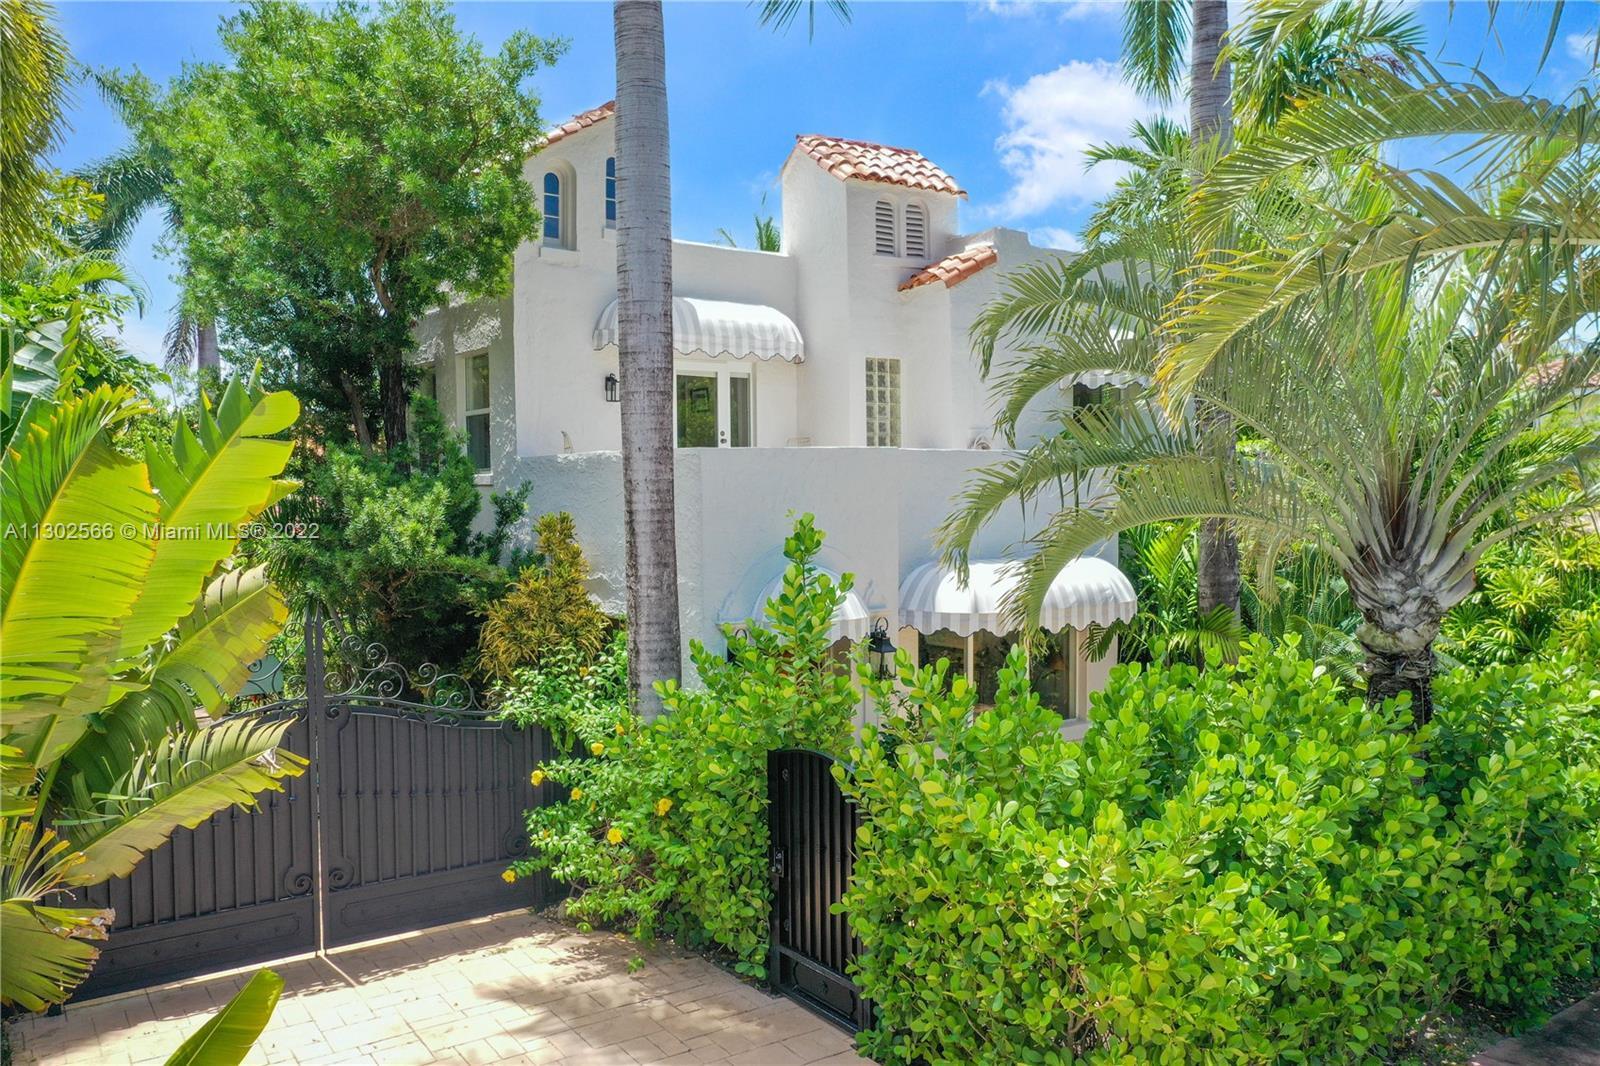 This quintessential 1930’s Miami Beach Mediterranean home is the perfect slice of paradise. It is an